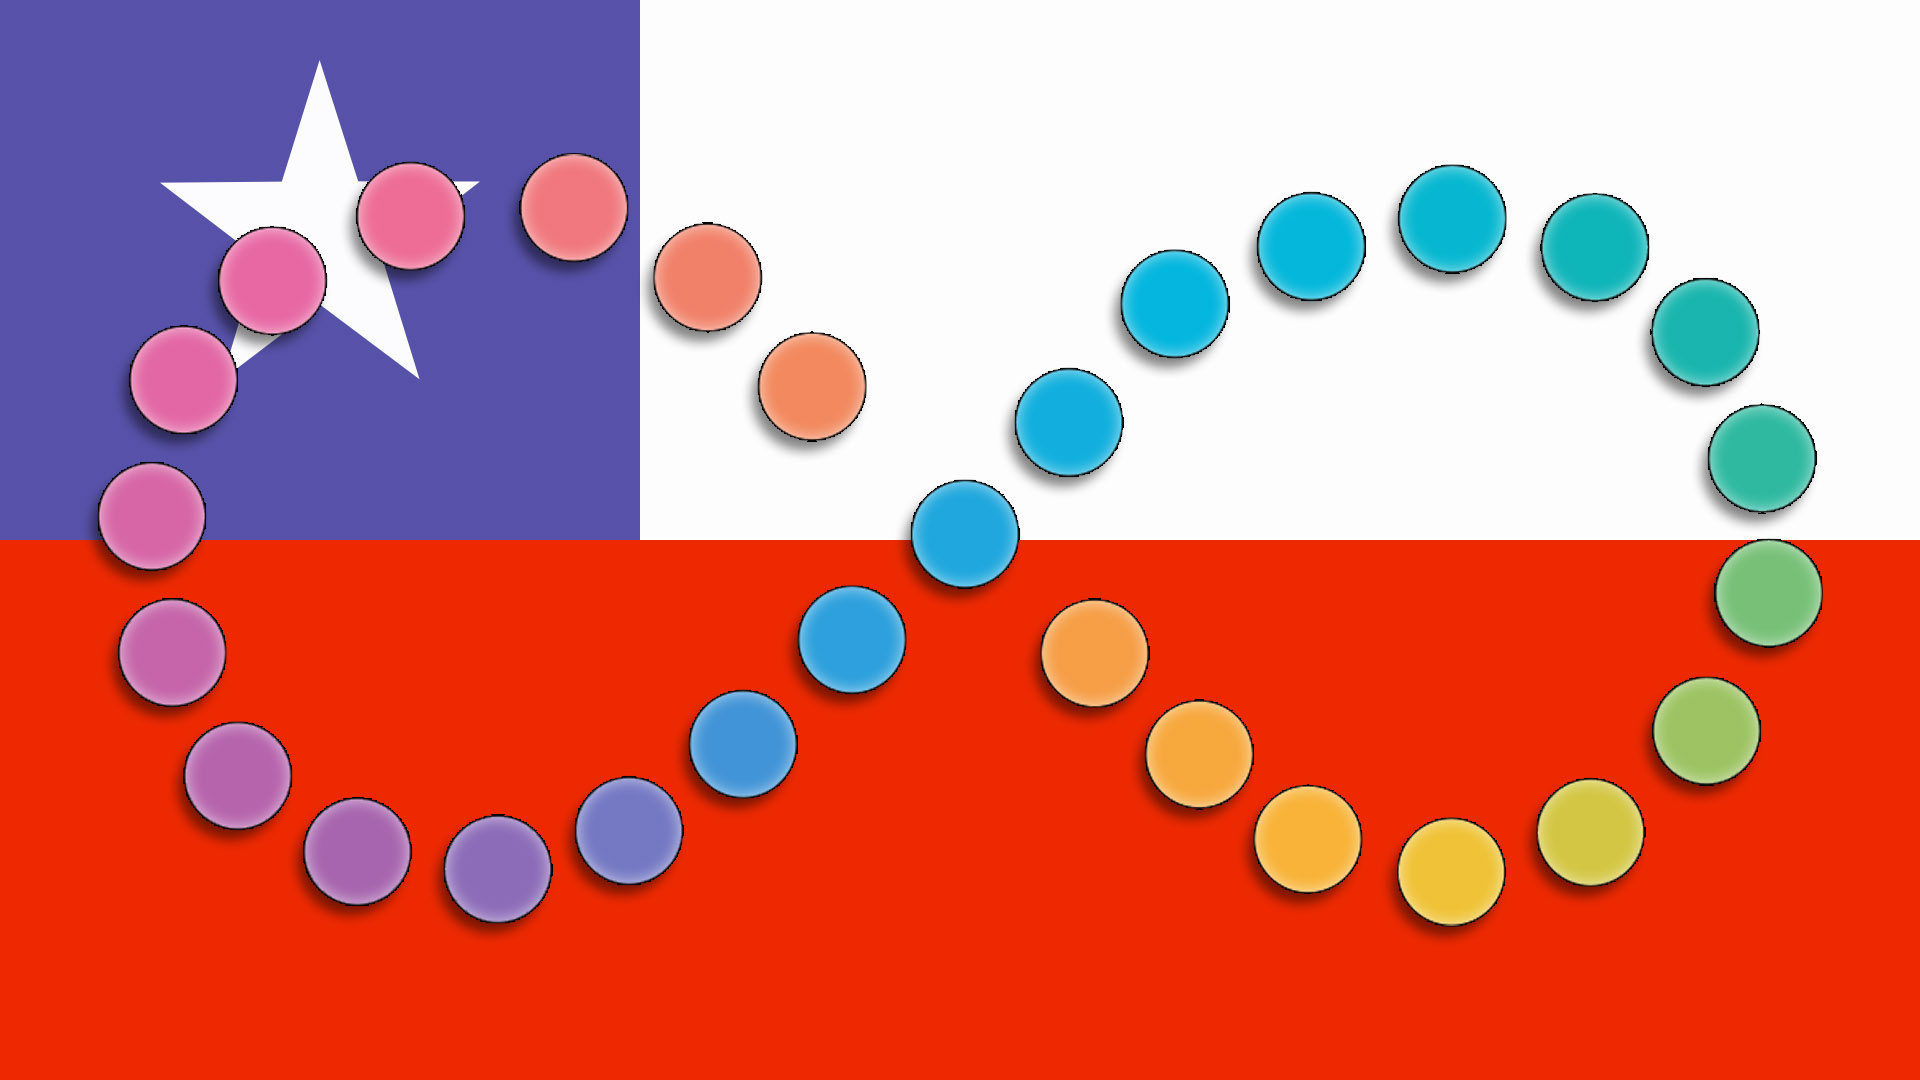 russia flag - Openclipart